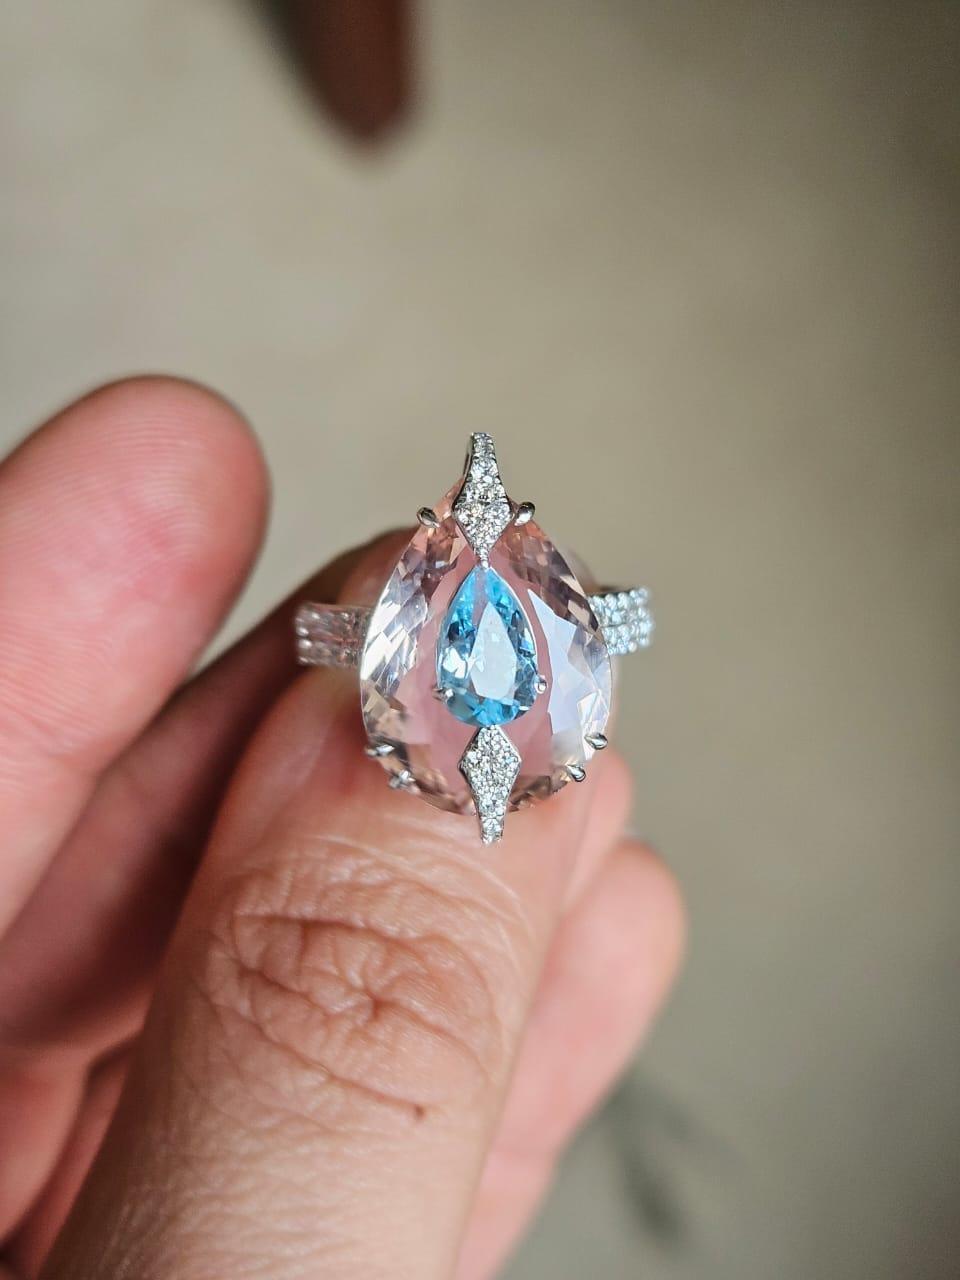 A very gorgeous and beautiful, one of a kind, Aquamarine & Morganite Engagement Ring set in 18K White Gold & Diamonds. The weight of the pear shaped Morganite is 6.96 carats. The weight of the pear shaped Aquamarine is 0.79 carats. The Aquamarine is